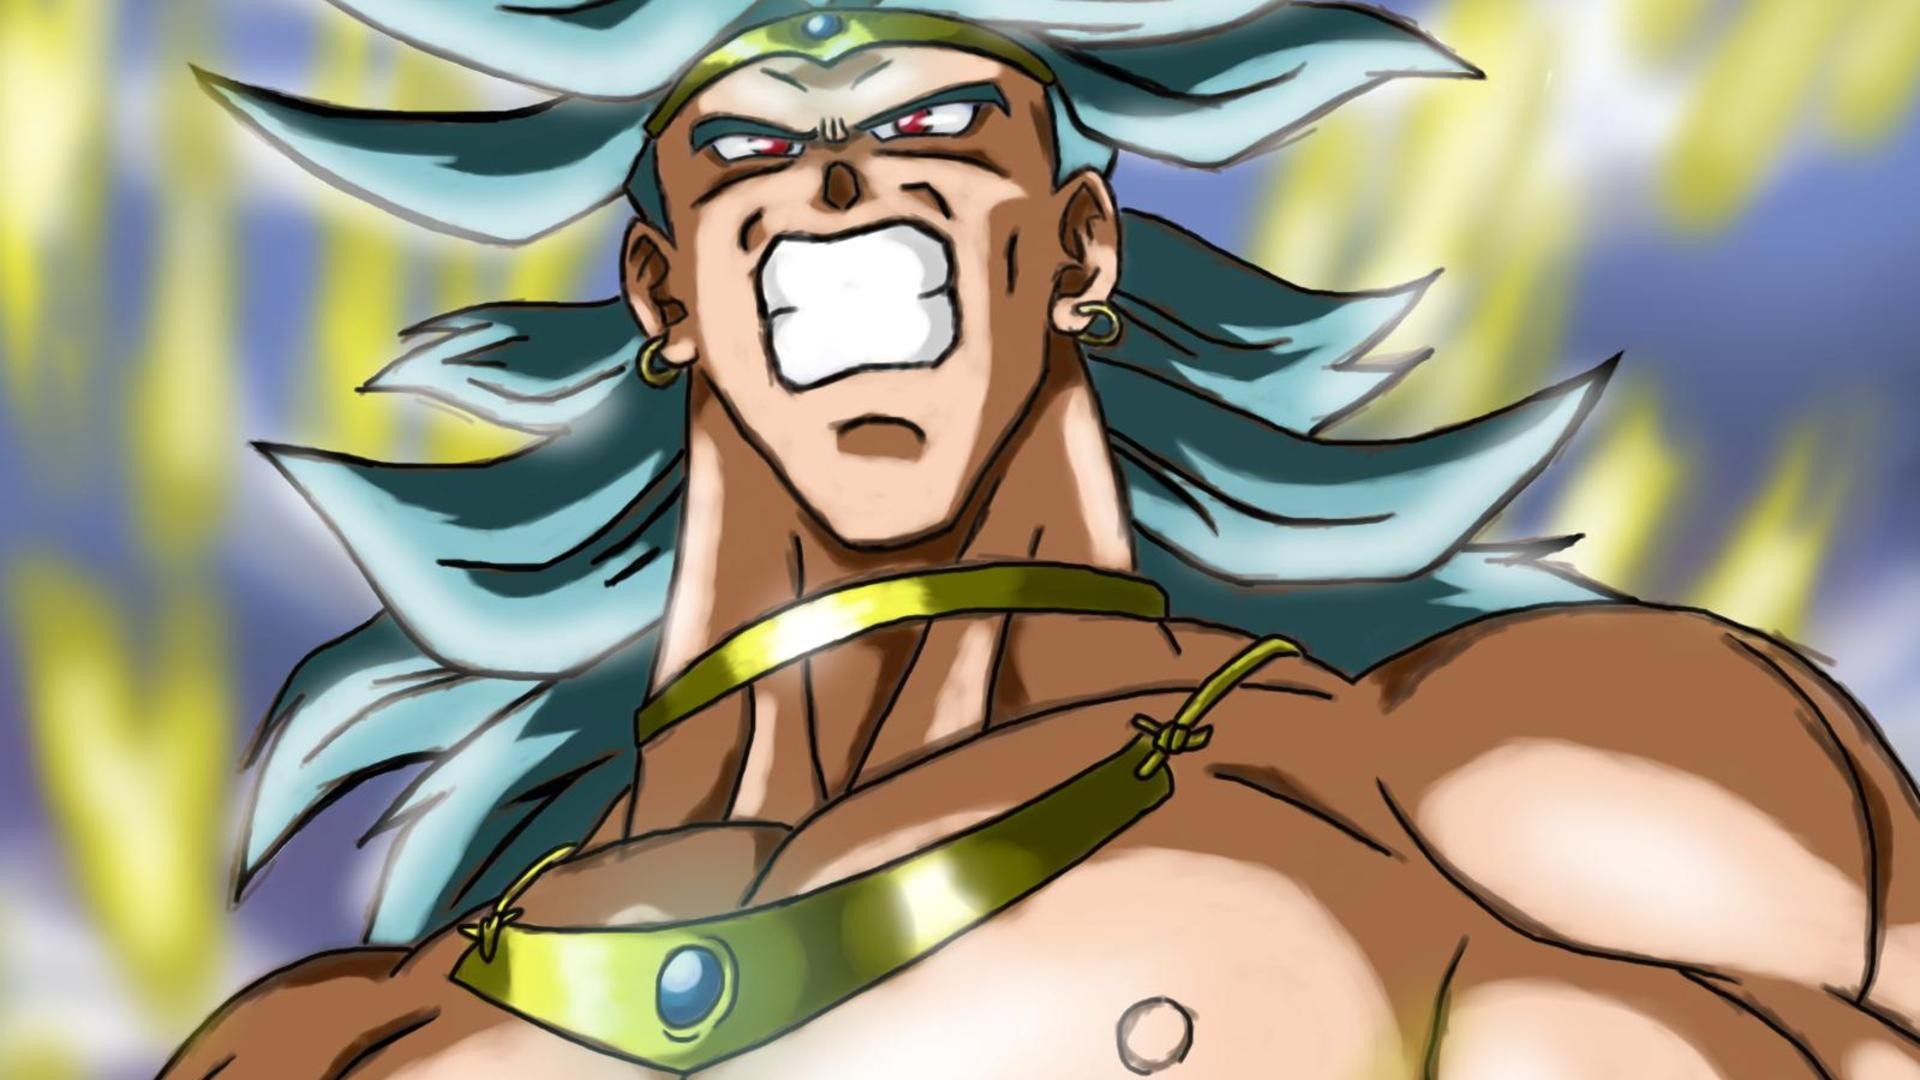 Wallpapers Enter The Dragon Ball Z Broly 1920x1080 | #234857 ...